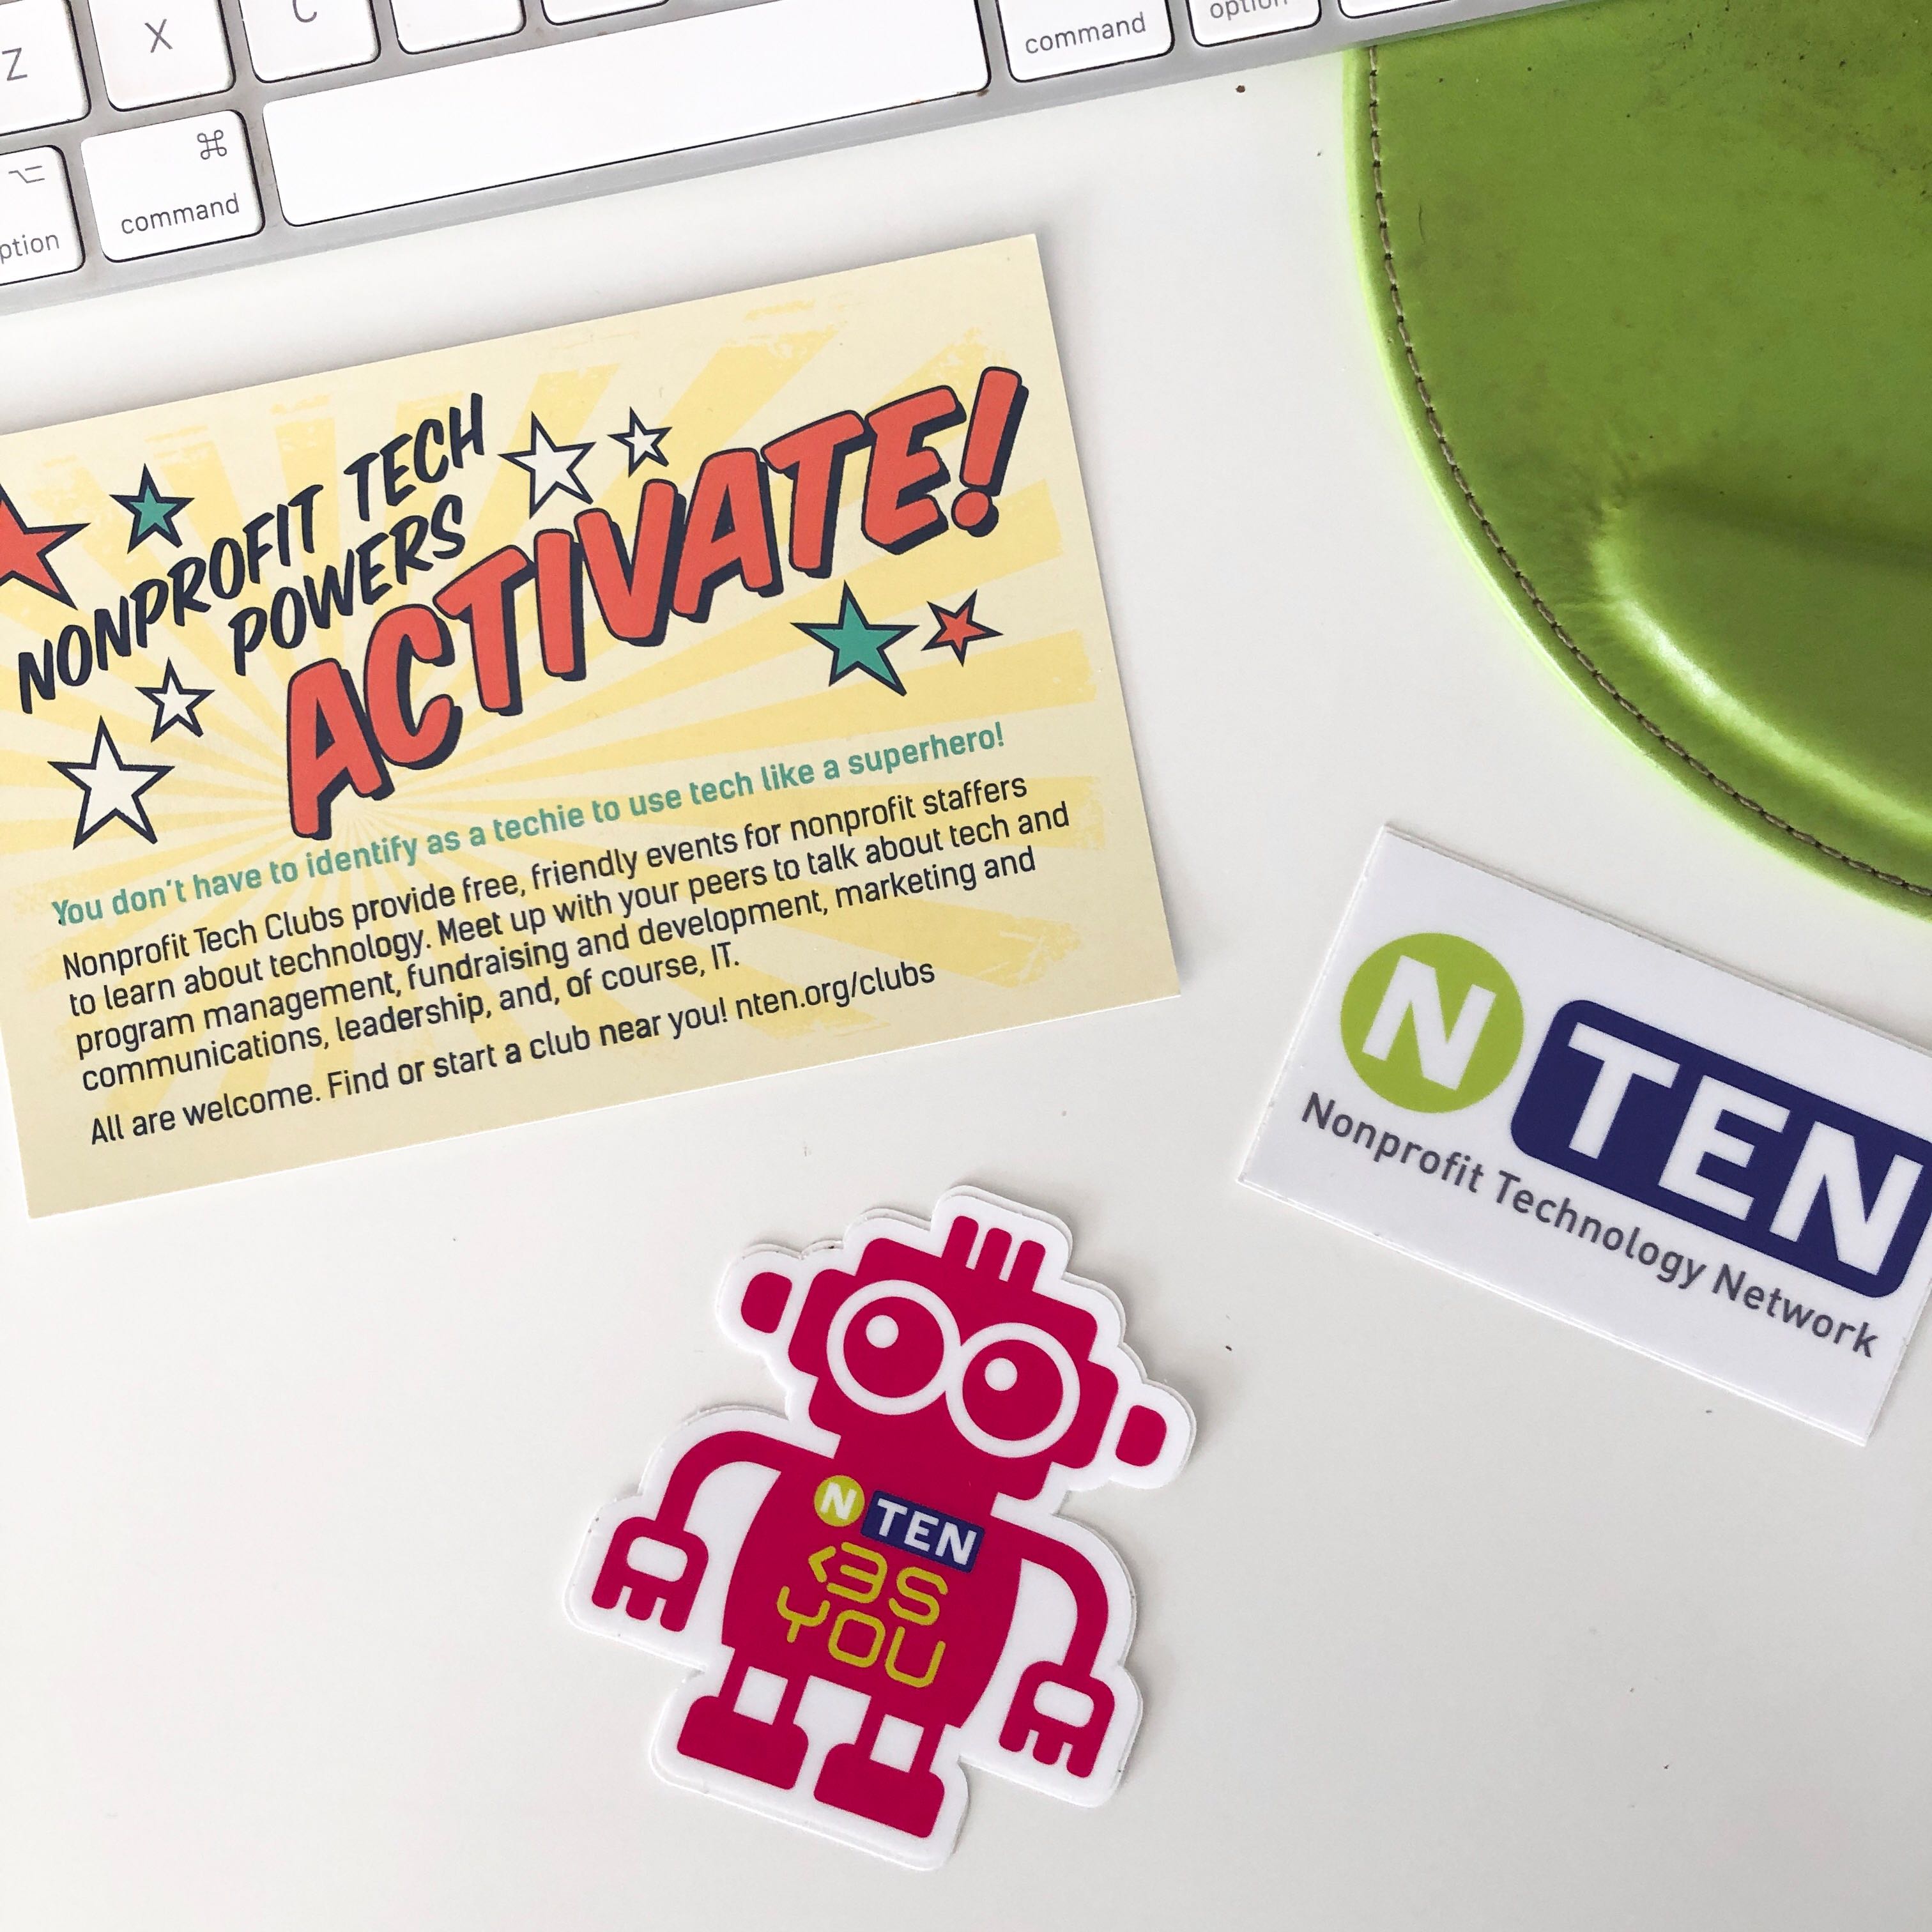 Nonprofit tech clubs promotional items. Learn about SEO for nonprofits and more through clubs like these and marketing agencies like Online Optimism.